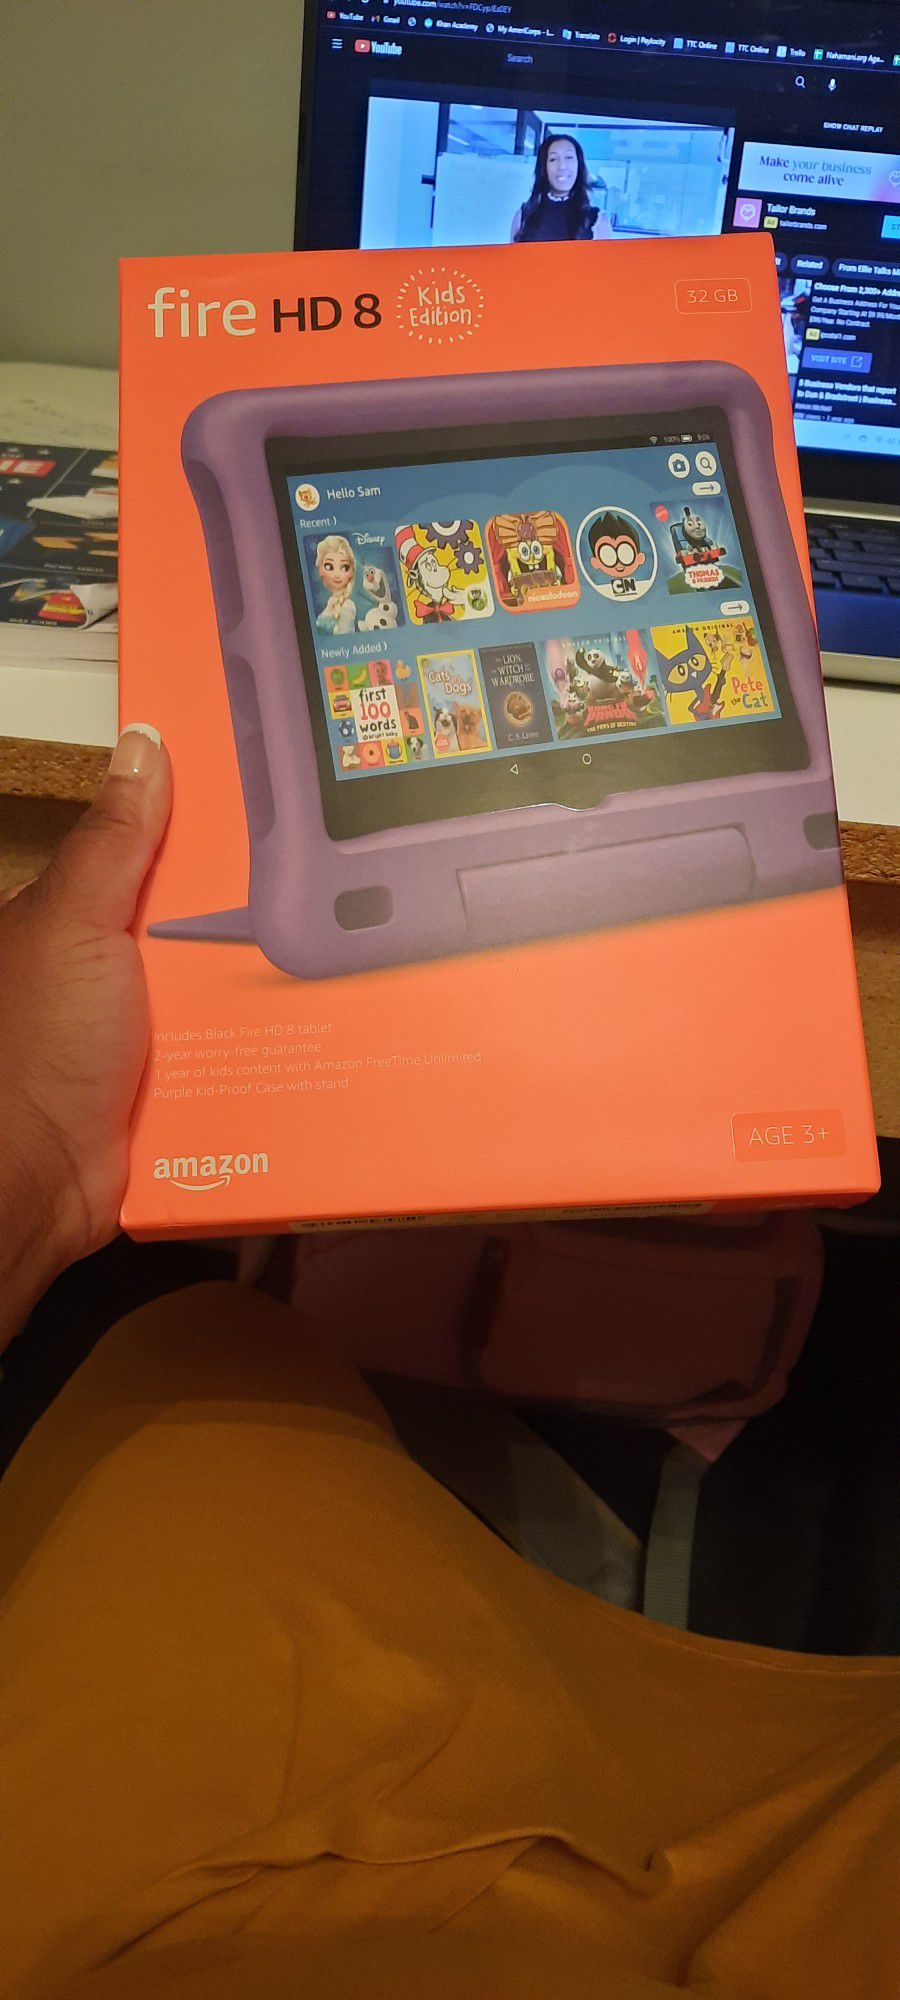 Fire HD8 KINDLE TABLET BRAND NEW STILL IN THE BOX